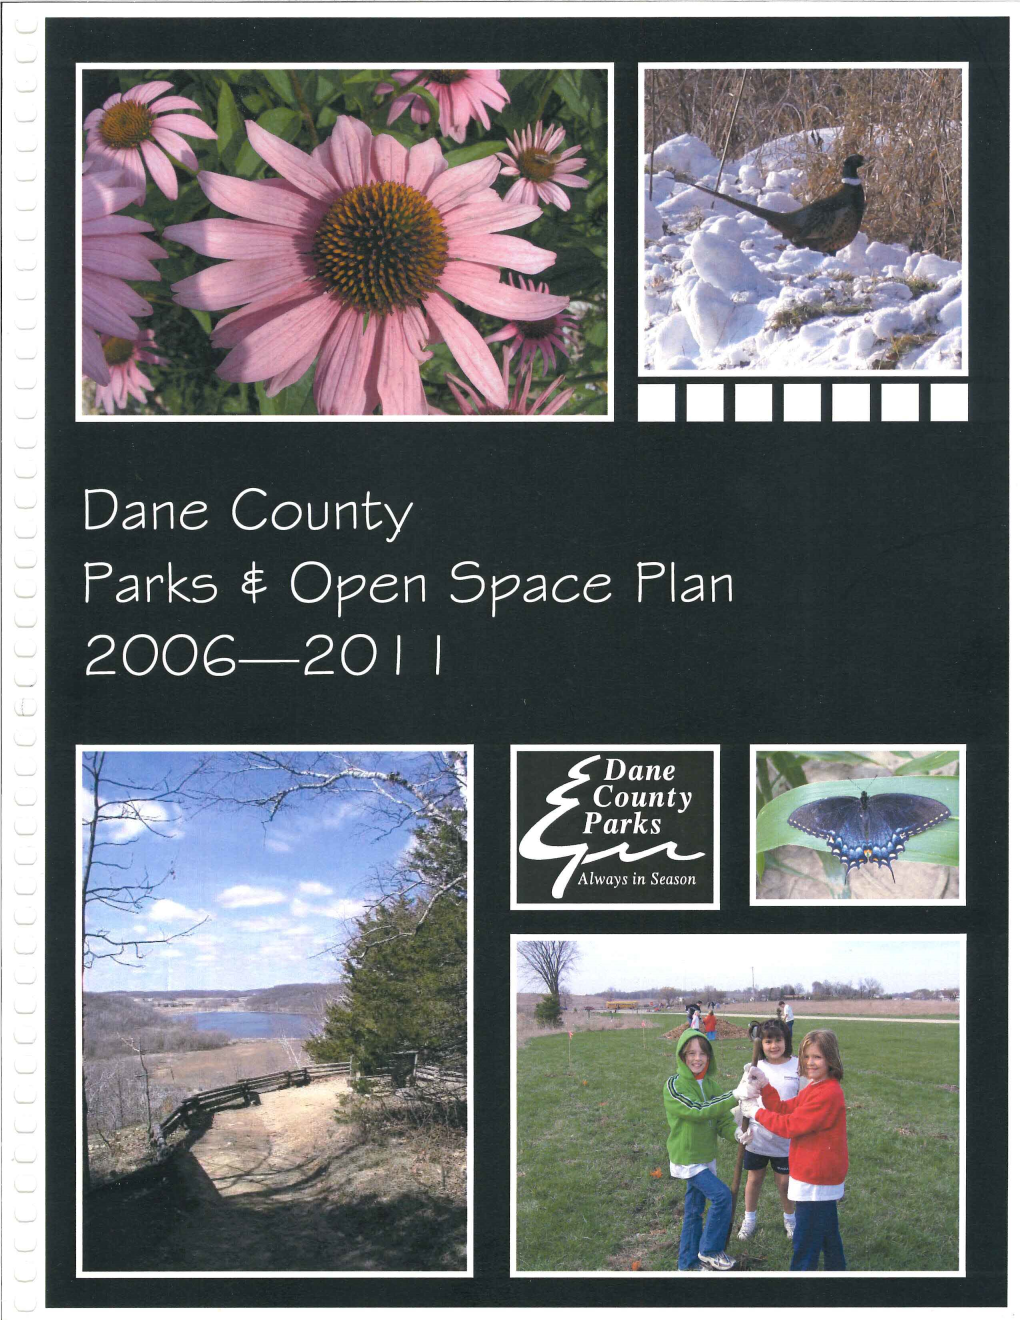 2006-2011 Dane County Parks and Open Space Plan in Response to Public Input, Forecasted Residential Growth, and Lack of Parks Within the Region